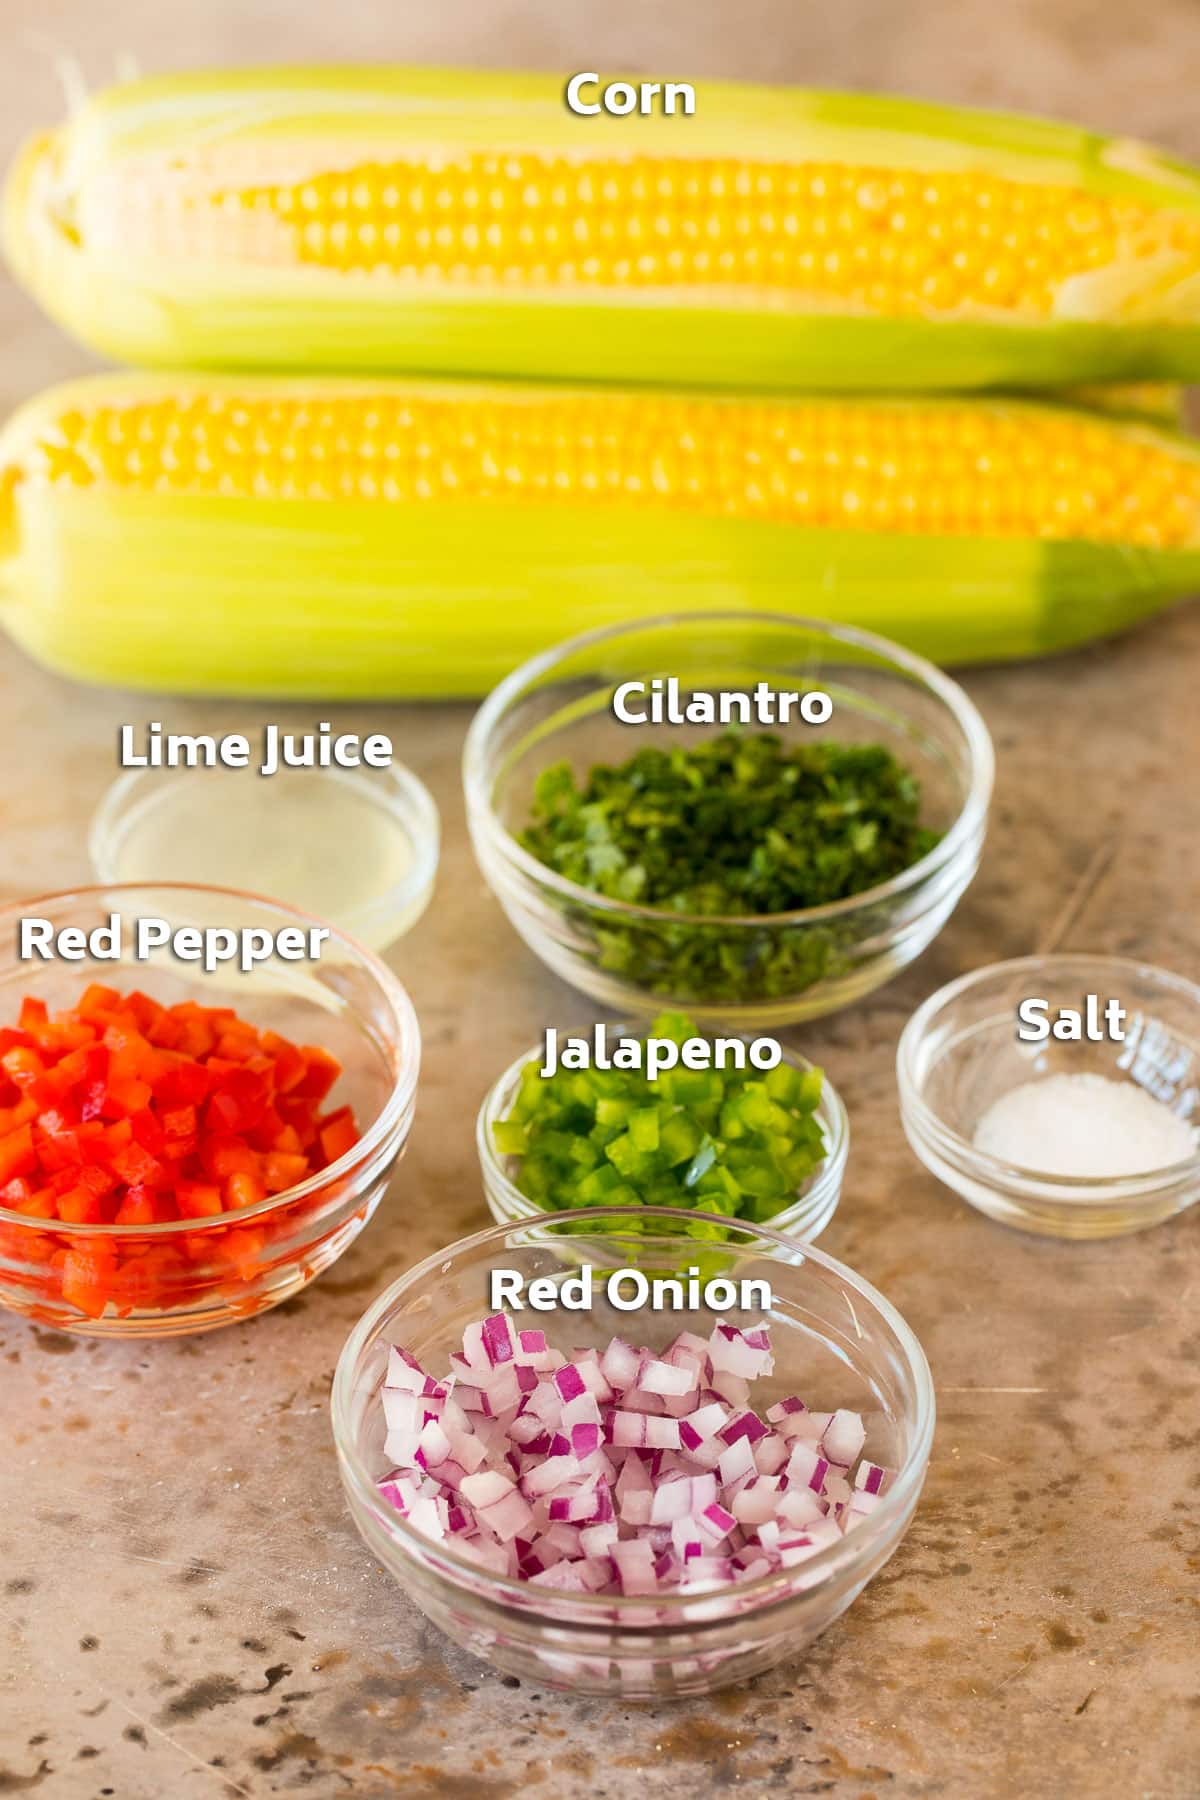 Ingredients including corn on the cob, peppers and onions.